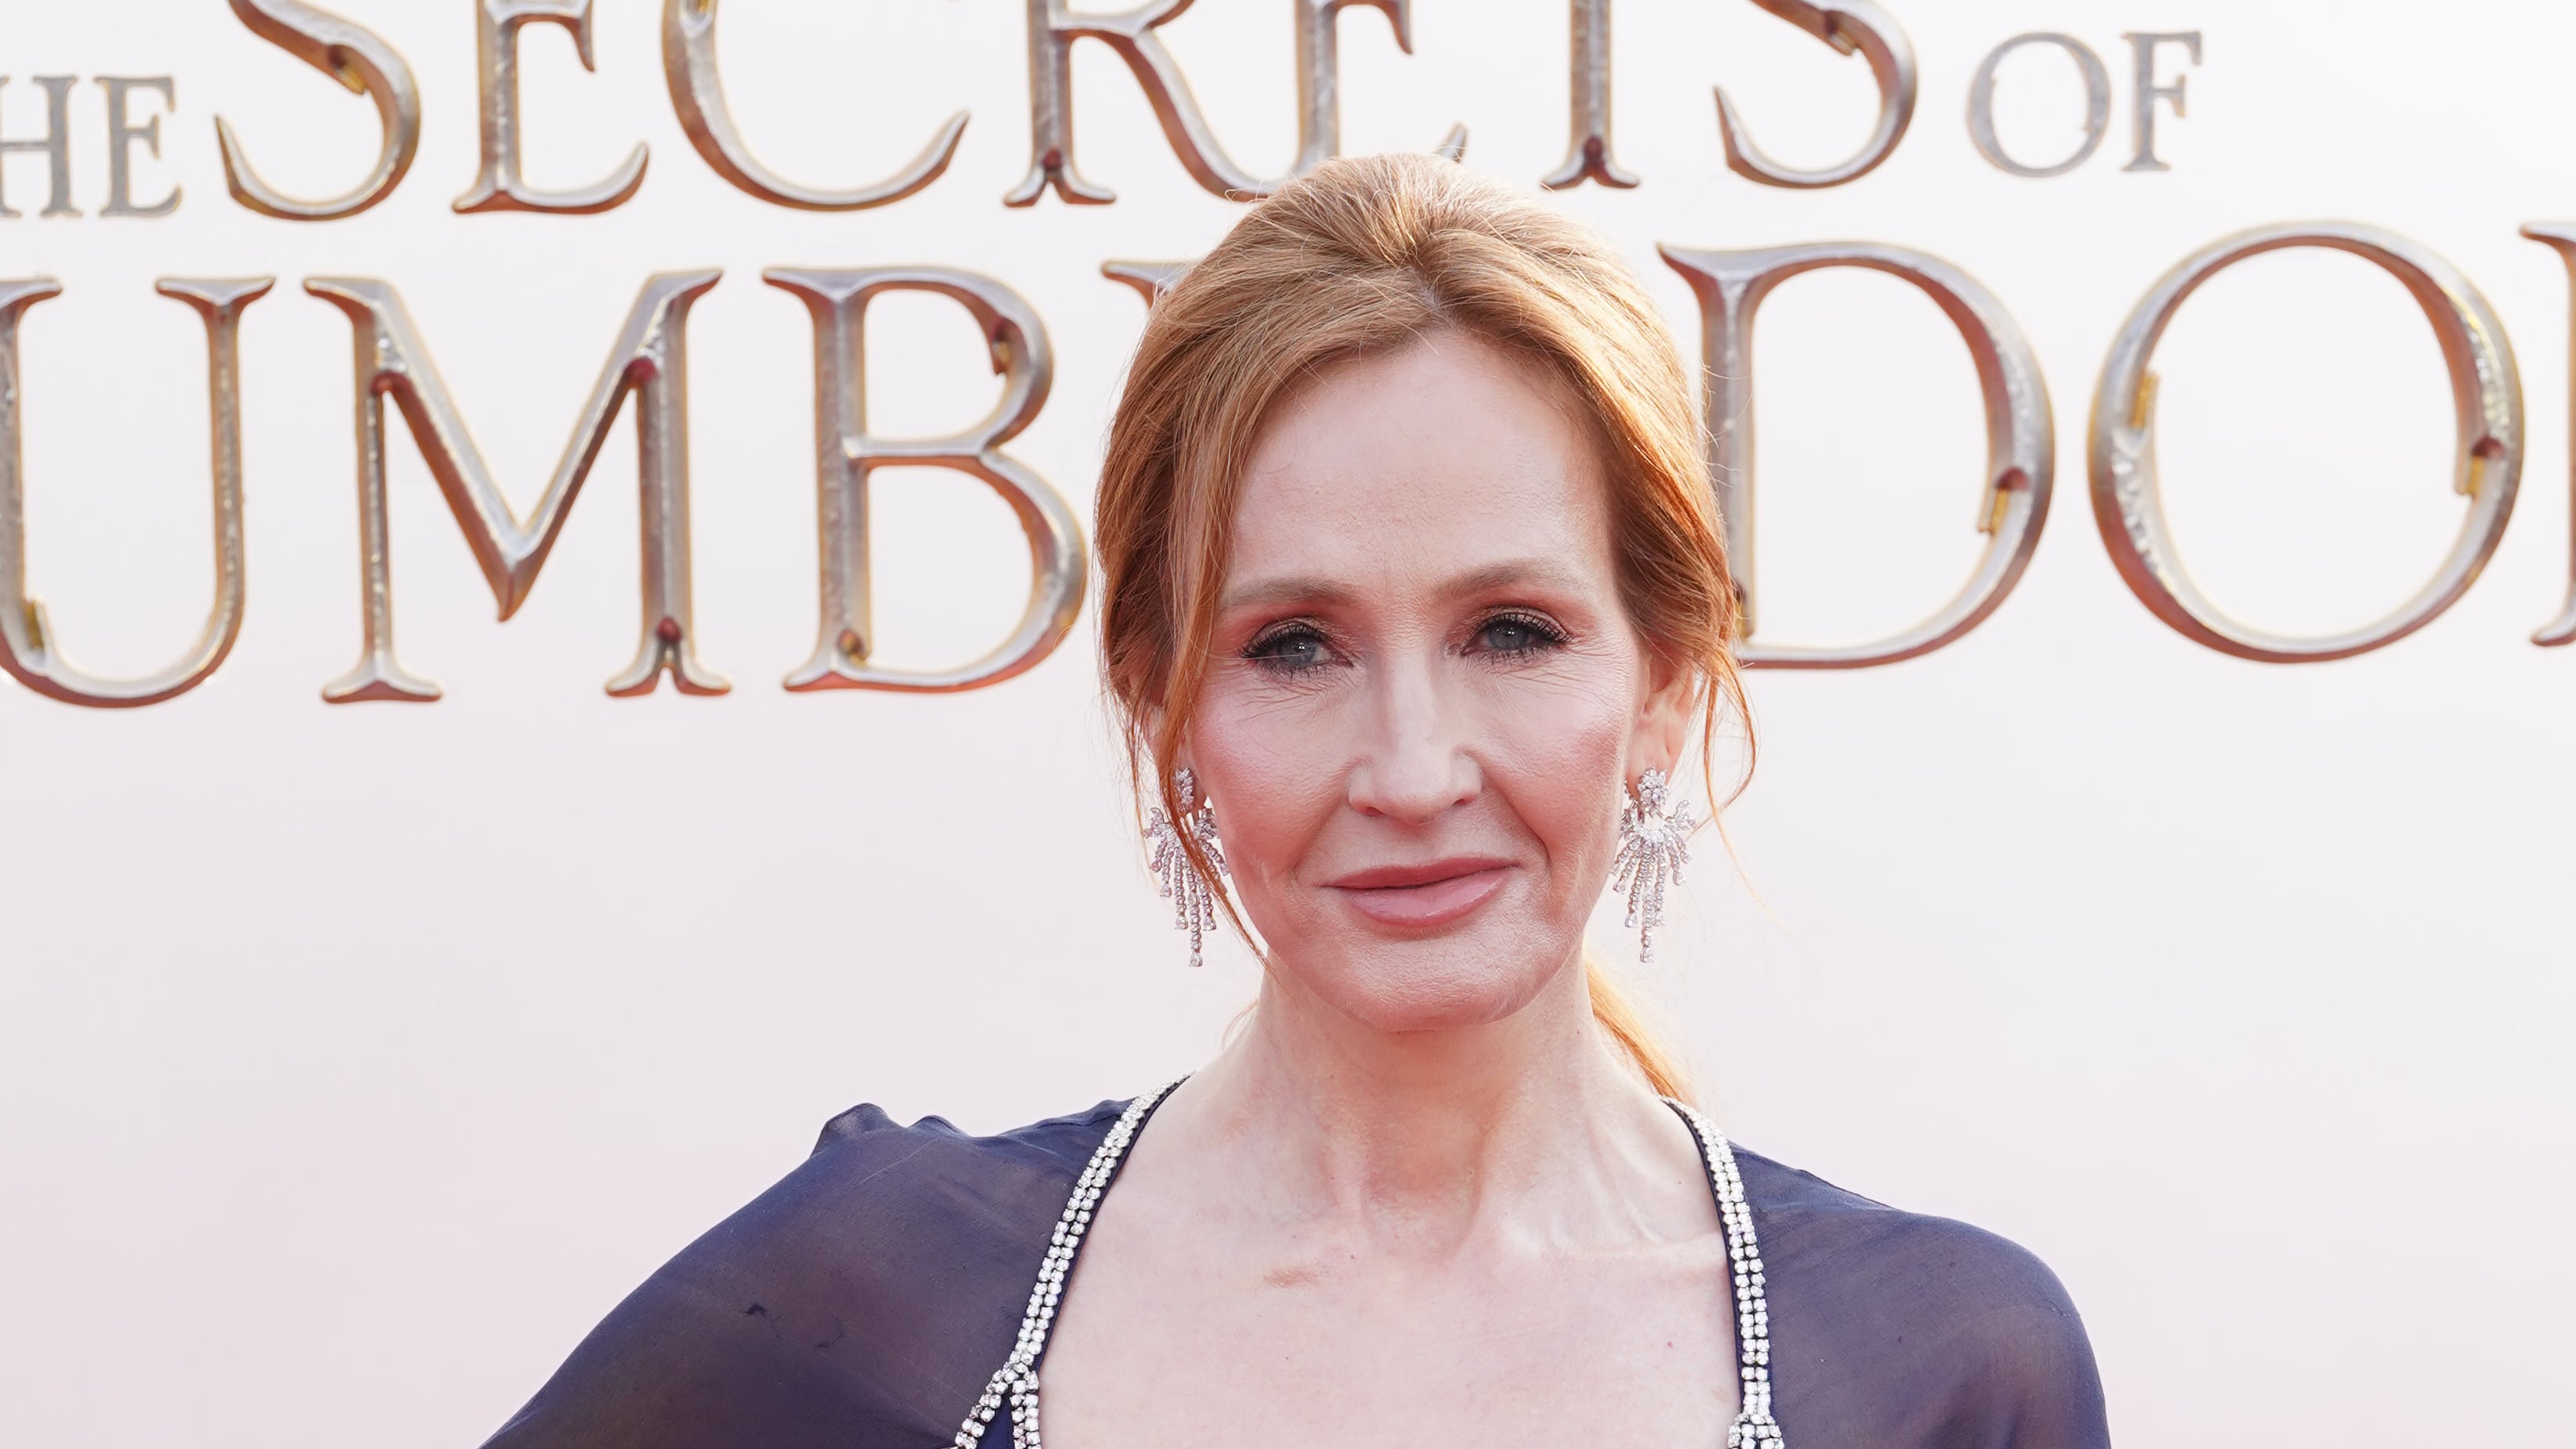 JK Rowling said she regrets not speaking out ‘far sooner’ on trans rights